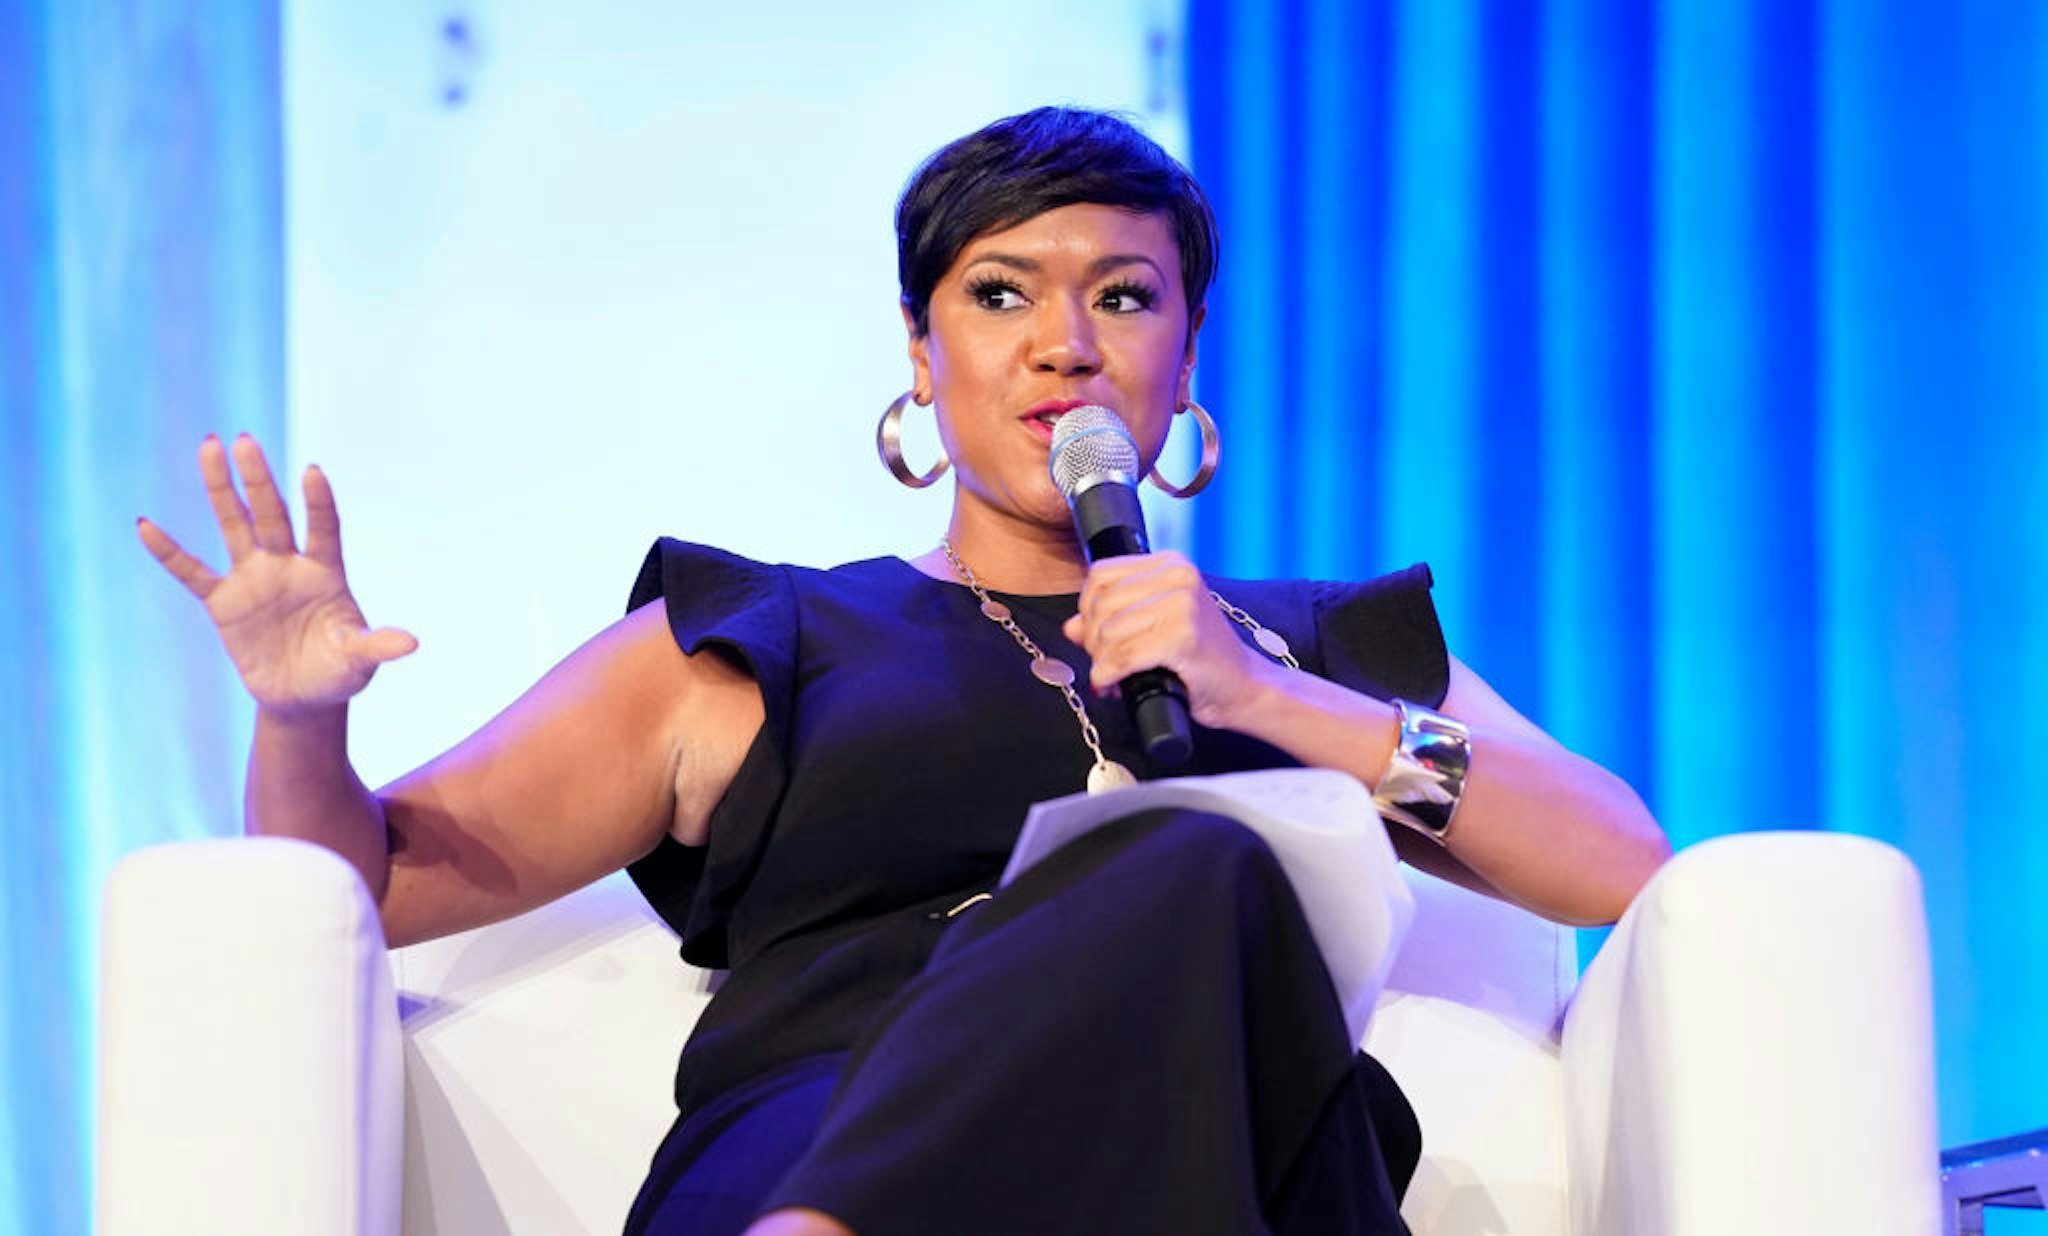 AUSTIN, TEXAS - OCTOBER 24: Tiffany D. Cross of The Beat DC speaks on stage during Texas Conference For Women 2019 at Austin Convention Center on October 24, 2019 in Austin, Texas. (Photo by Marla Aufmuth/Getty Images for Texas Conference for Women 2019)